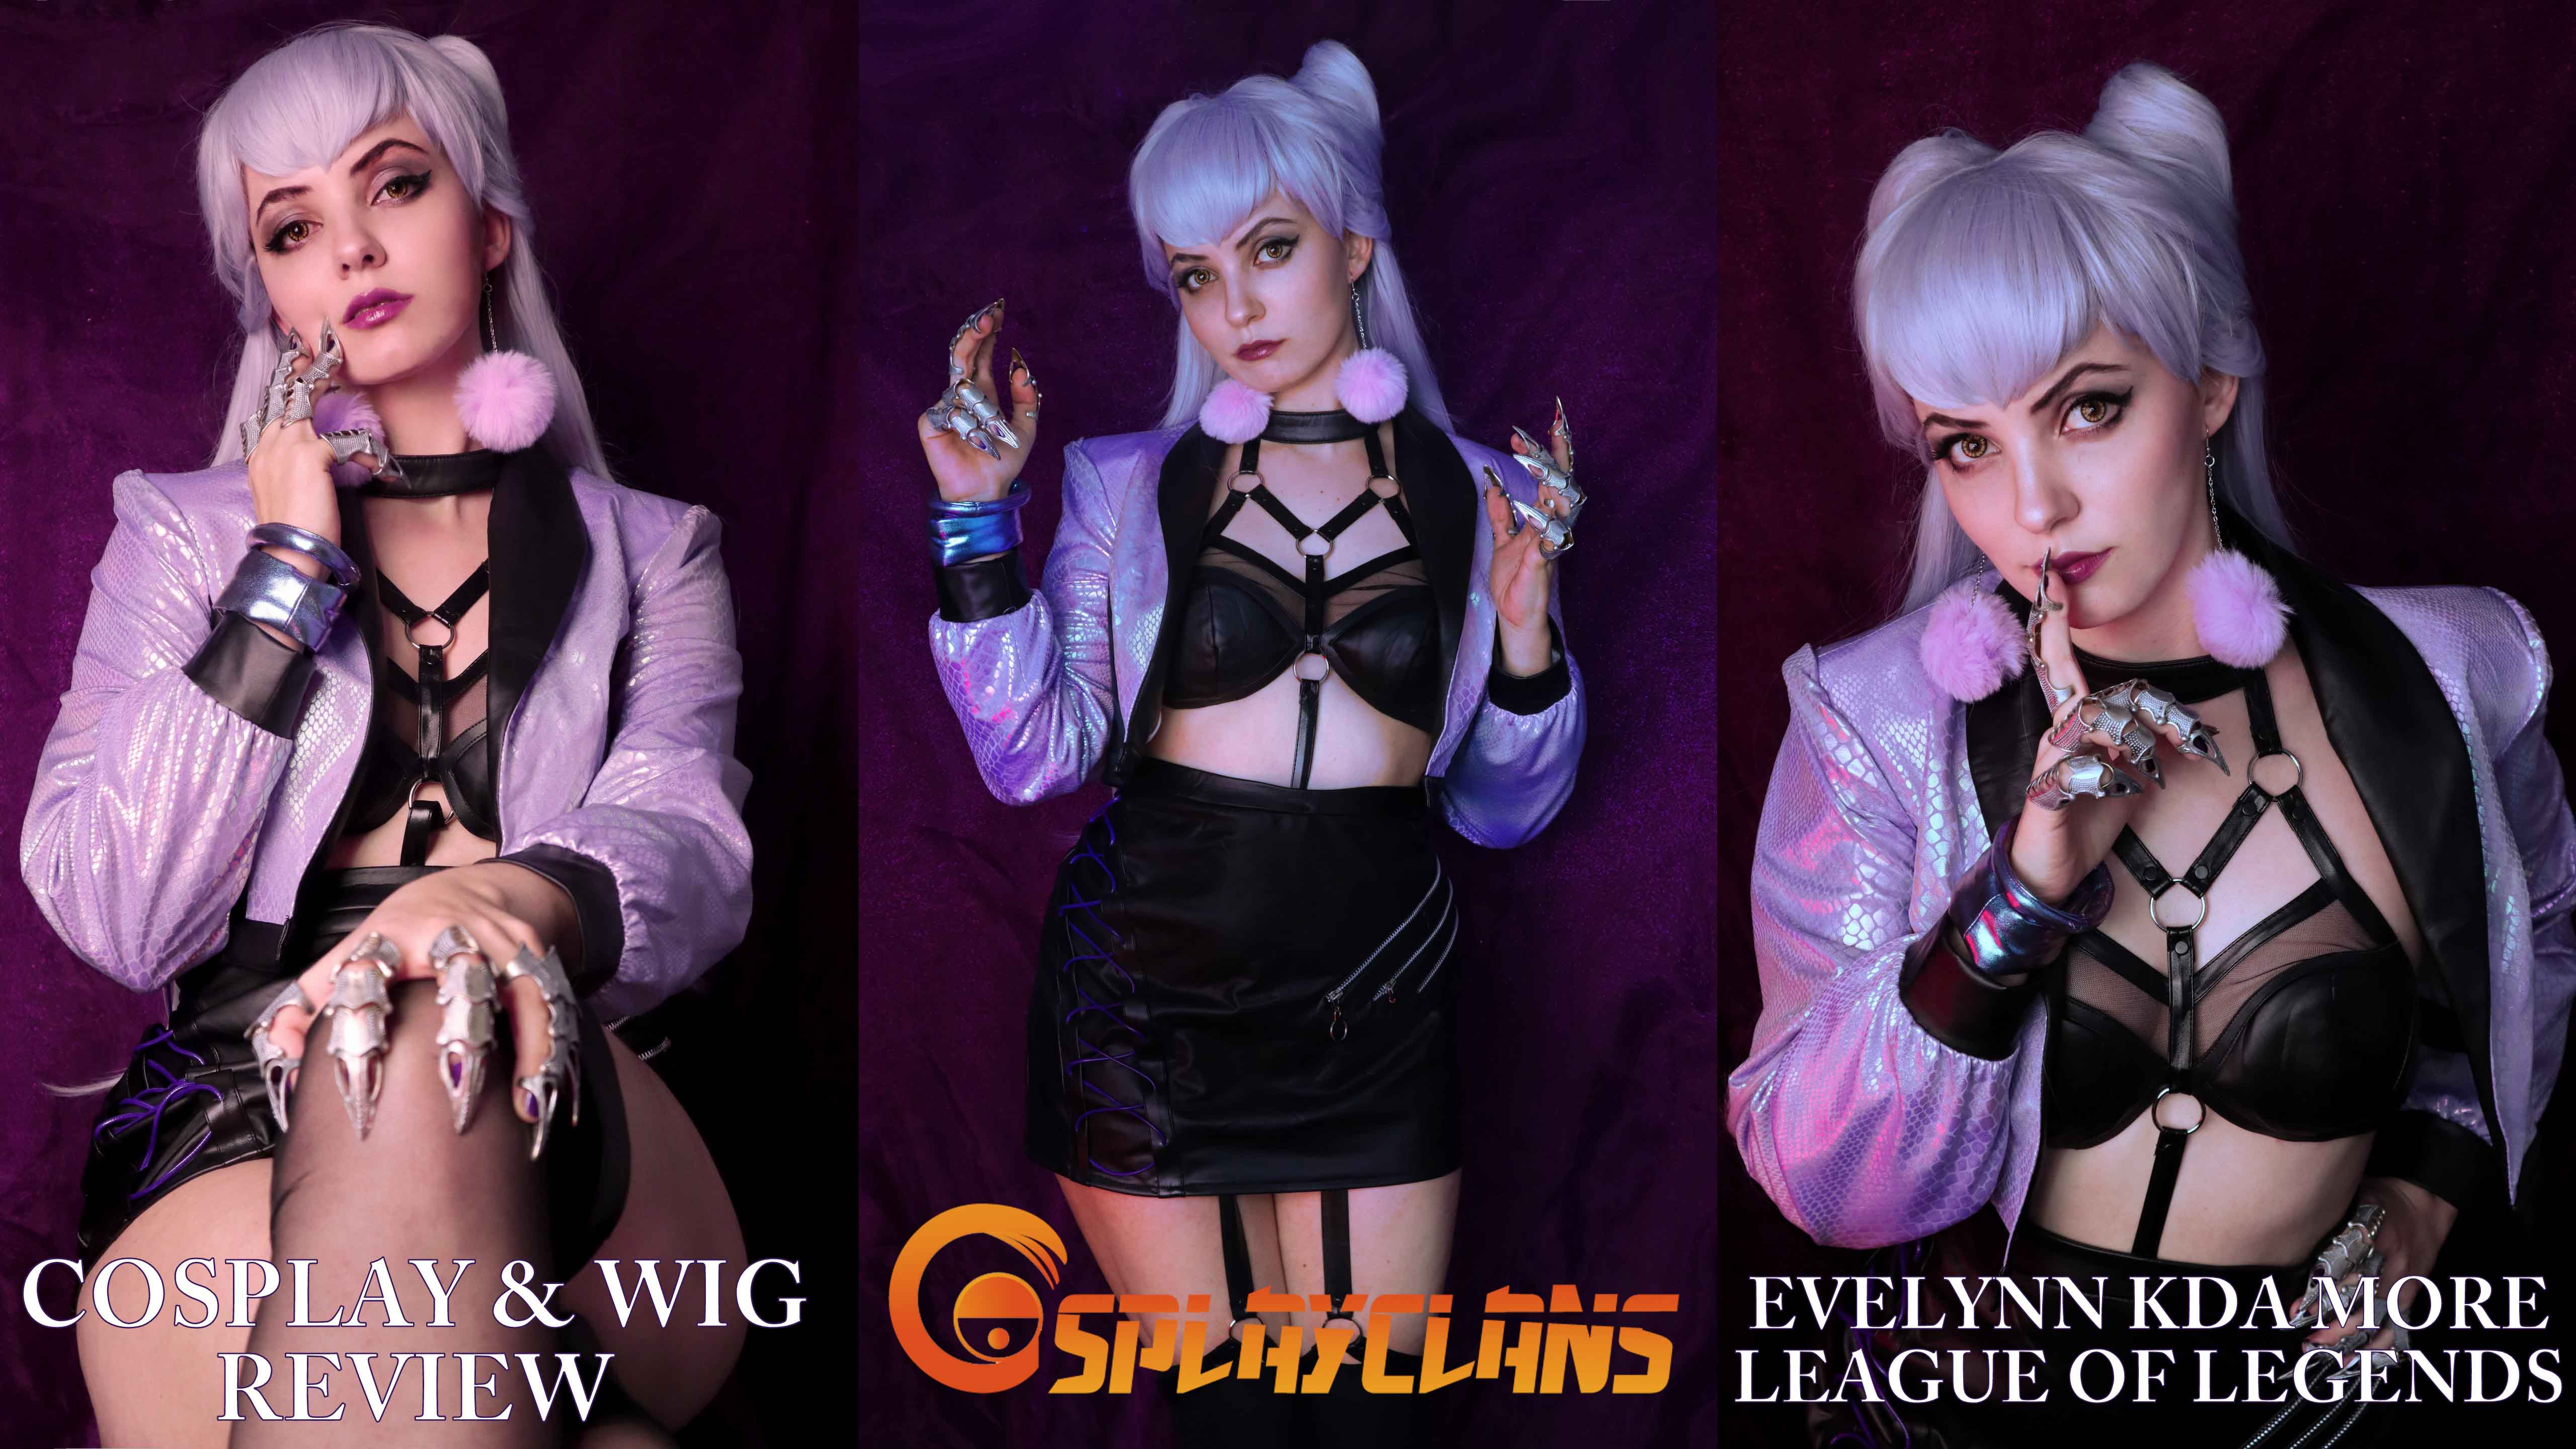 Cosplay & wig review: Evelynn KDA more from Cosplayclans